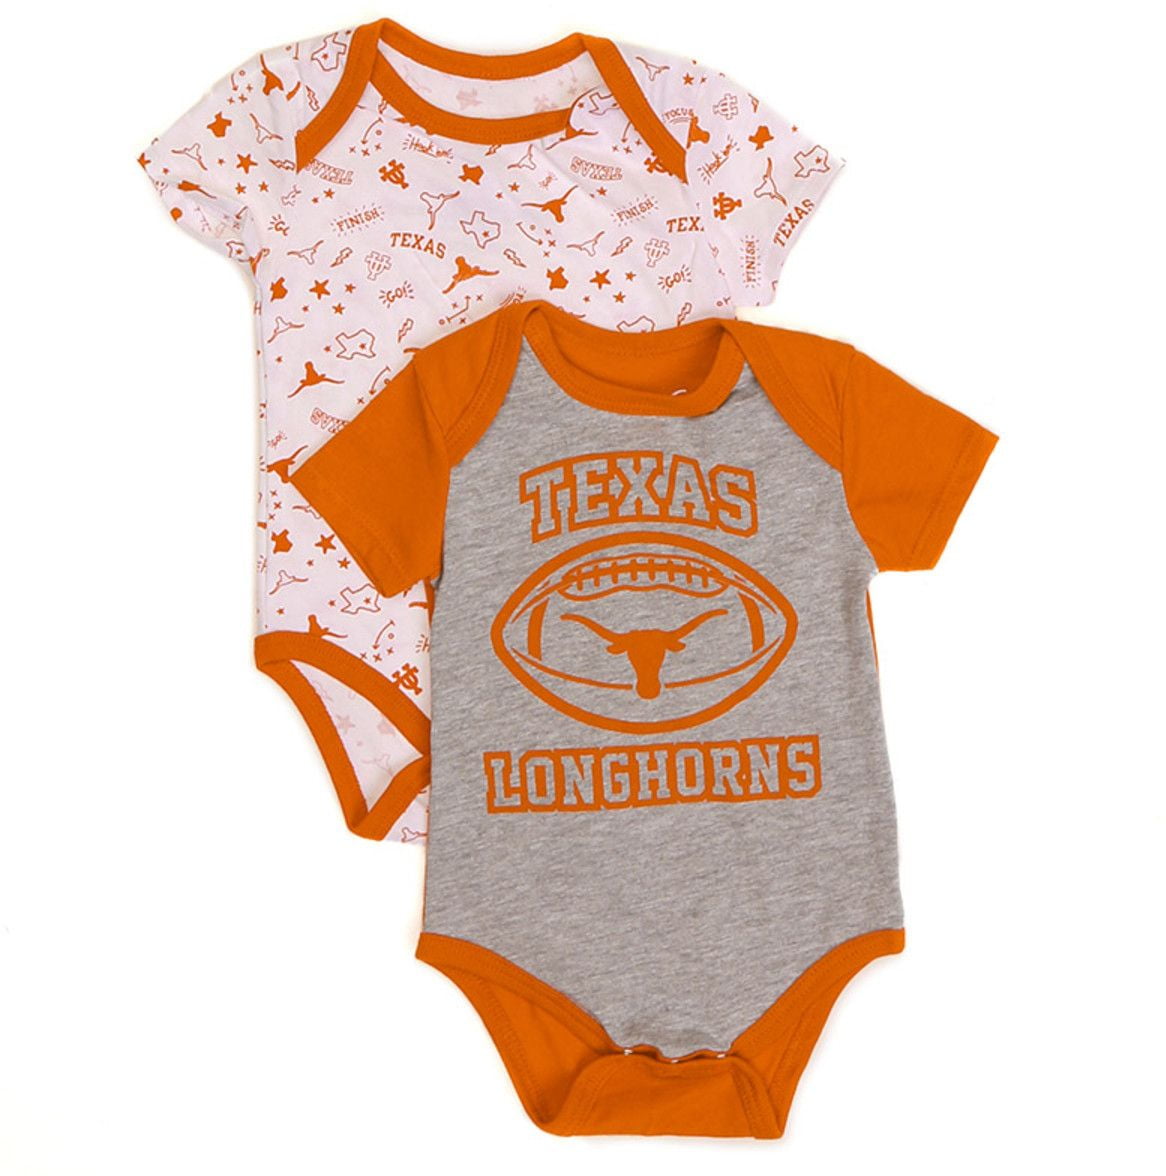 Texas Longhorns Baby Creeper 12 Months New One Piece 